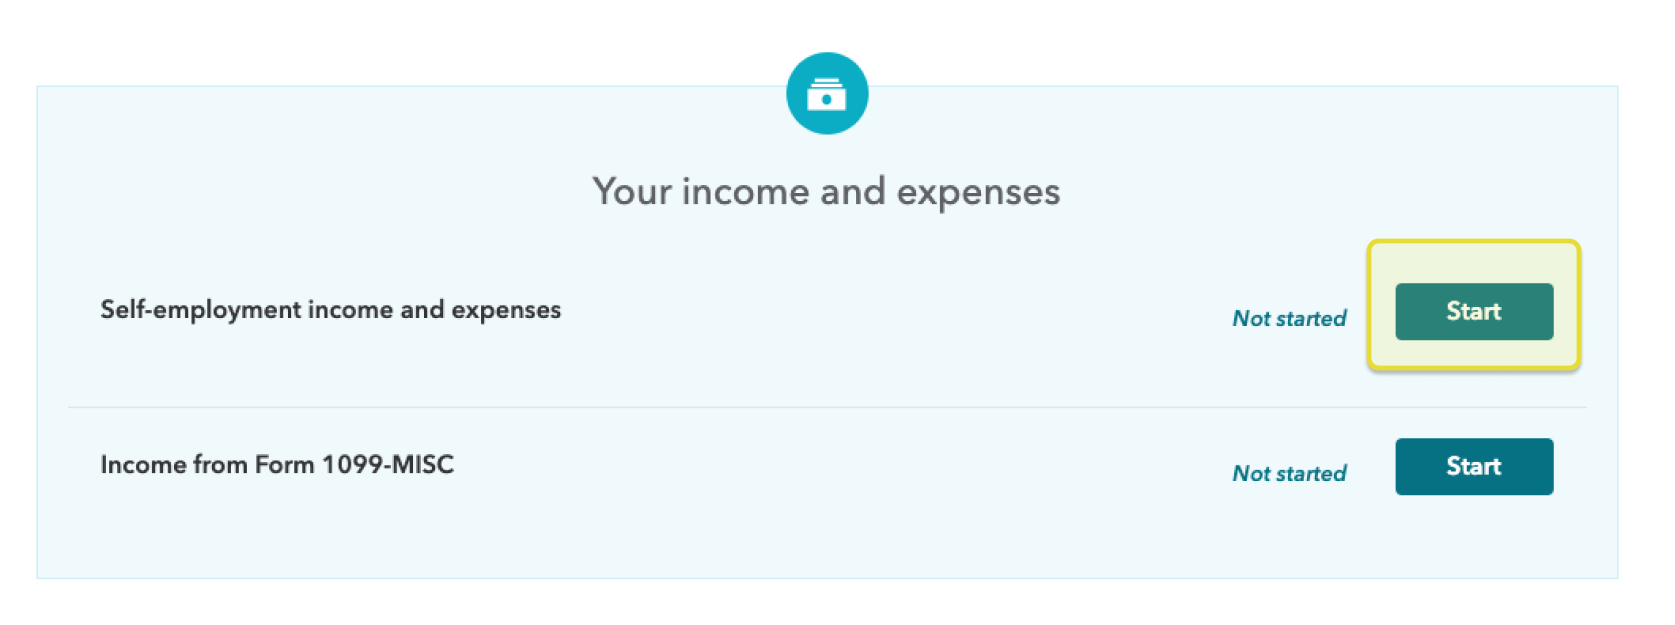 Your_income_and_expenses.png